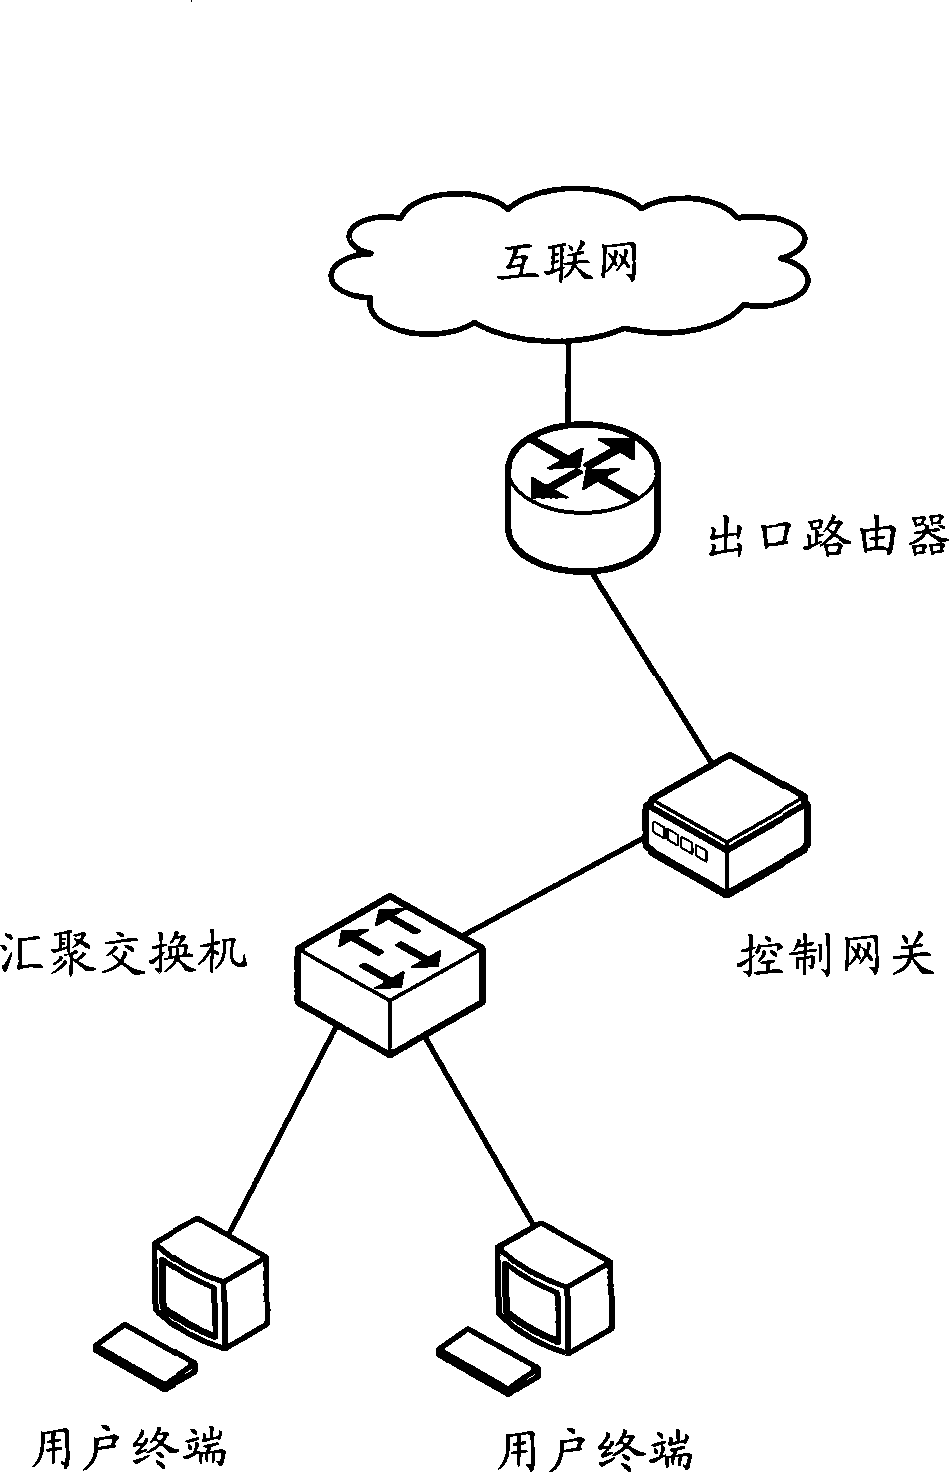 Method and system for controlling user access